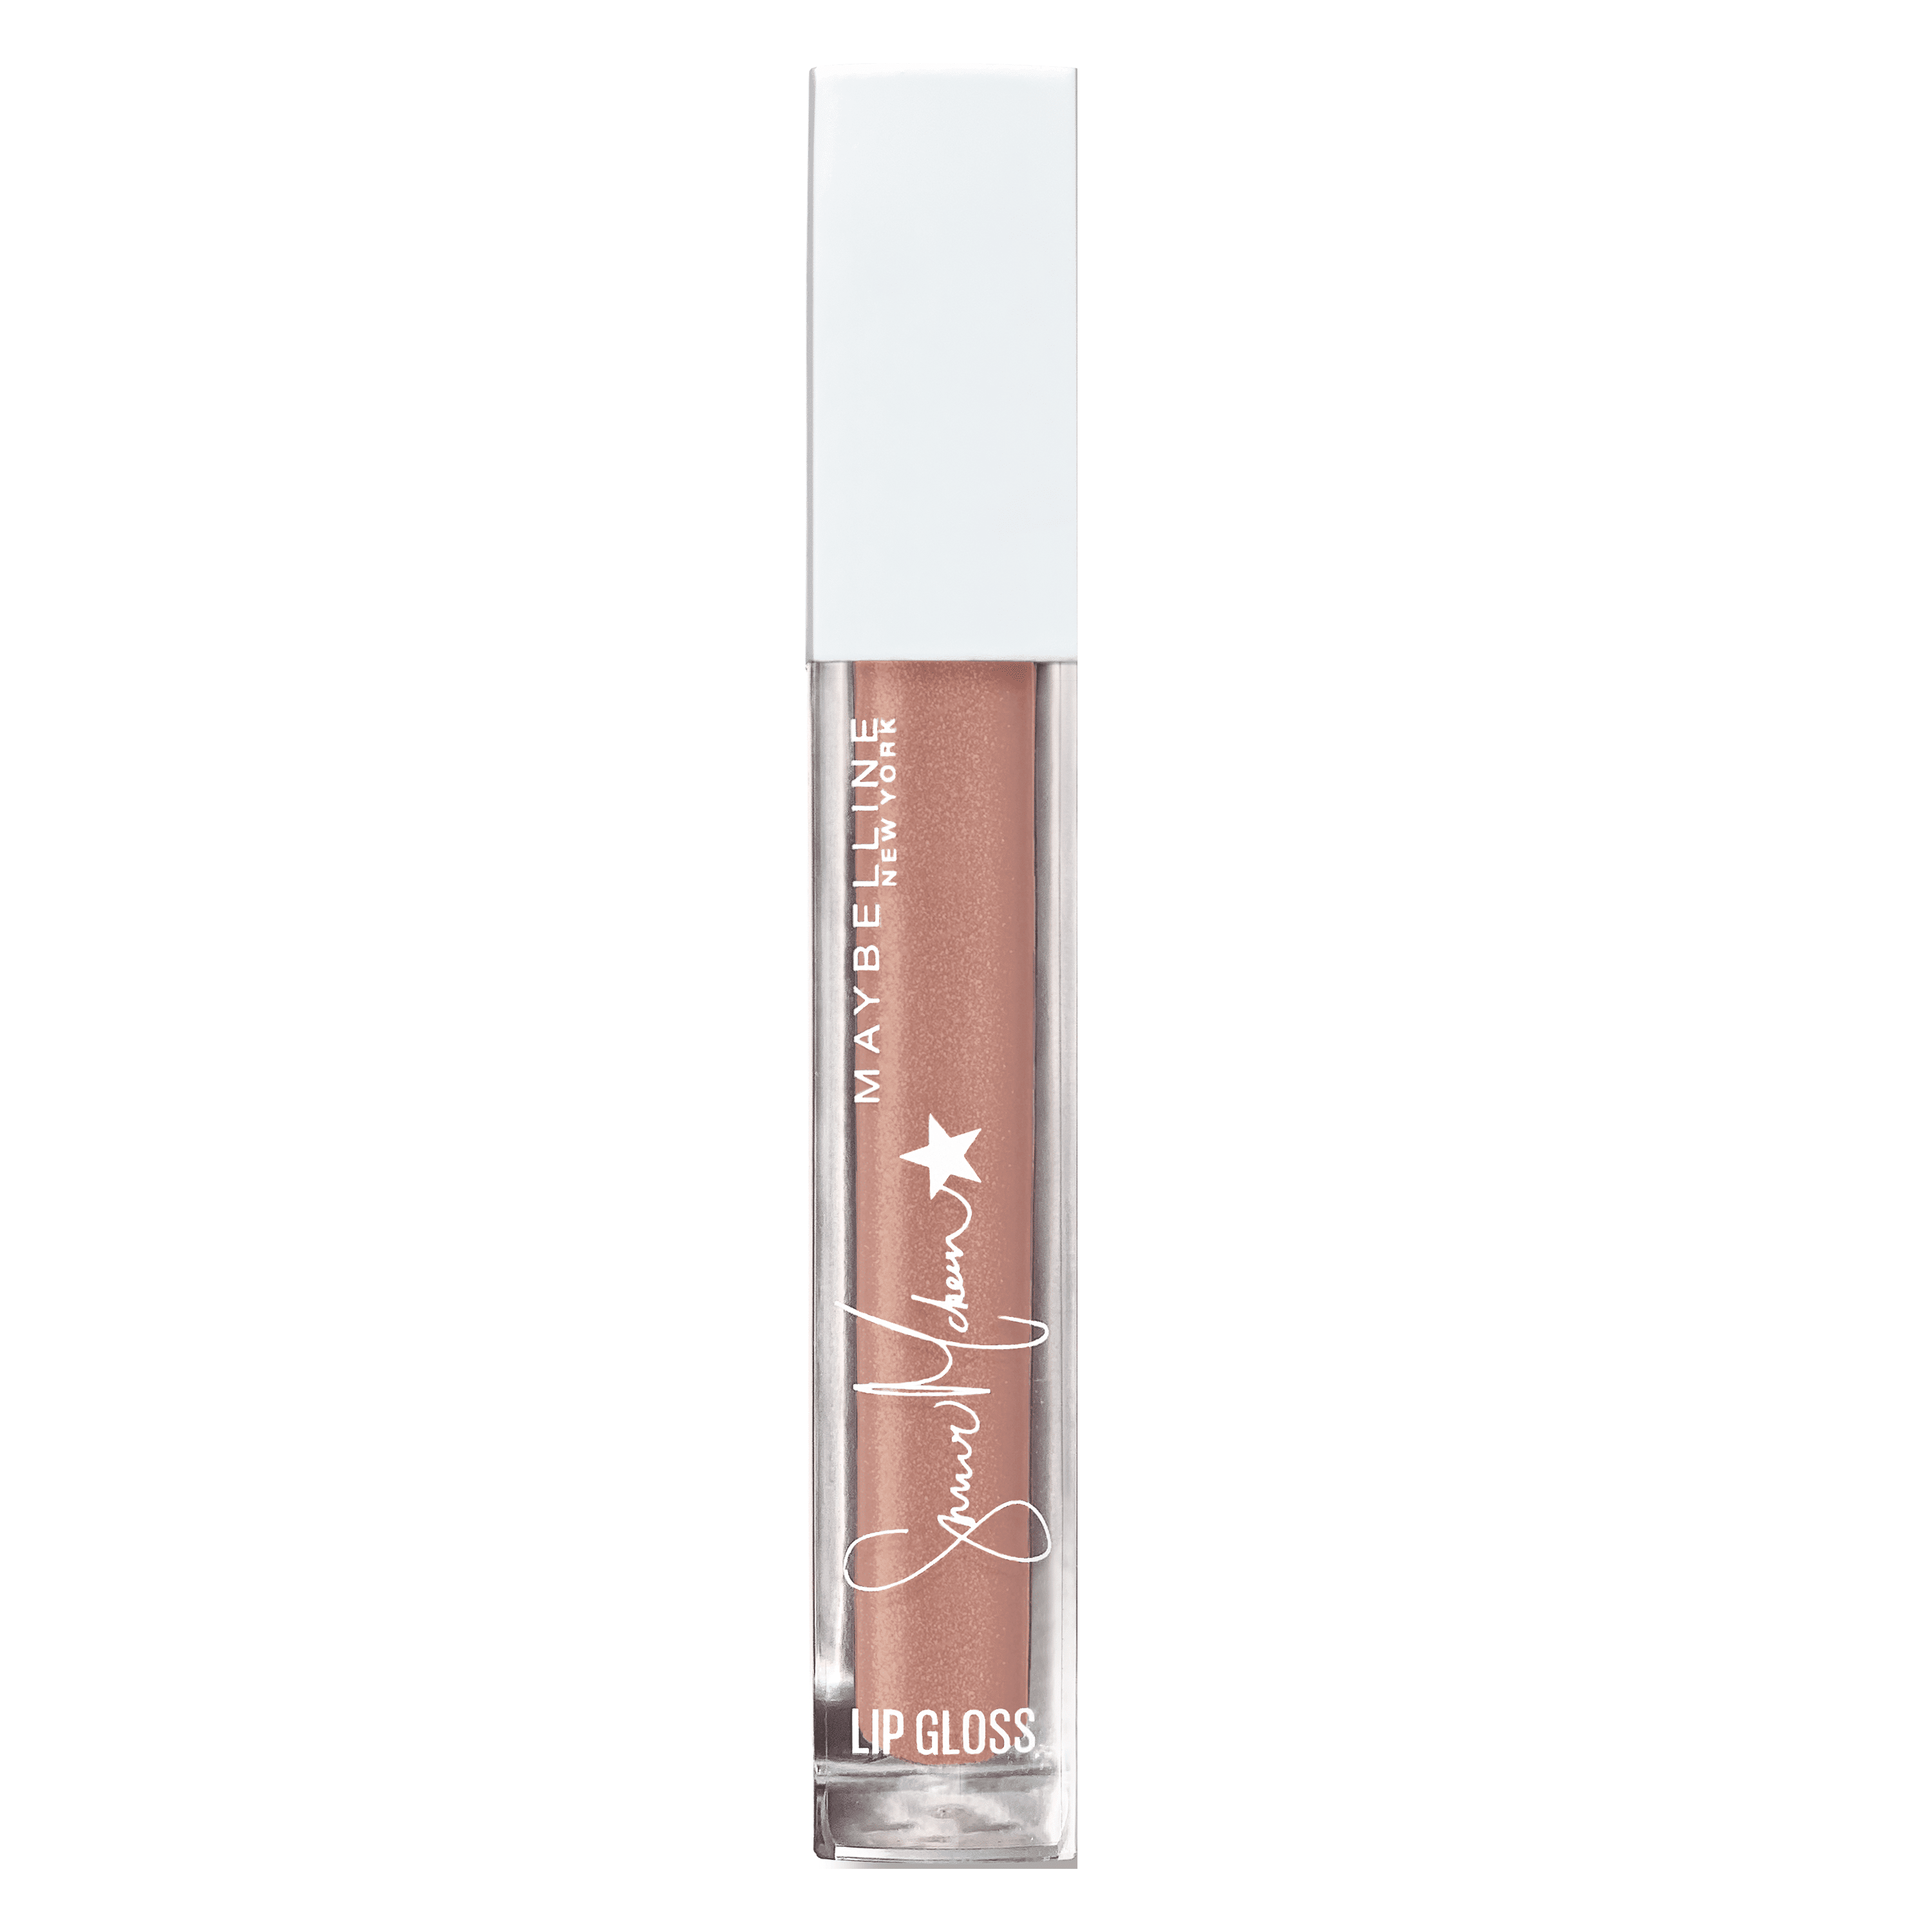 Maybelline Summer Mckeen Lip Gloss Makeup Ultra Shiny Glossy Finish, Tan Line - image 1 of 10